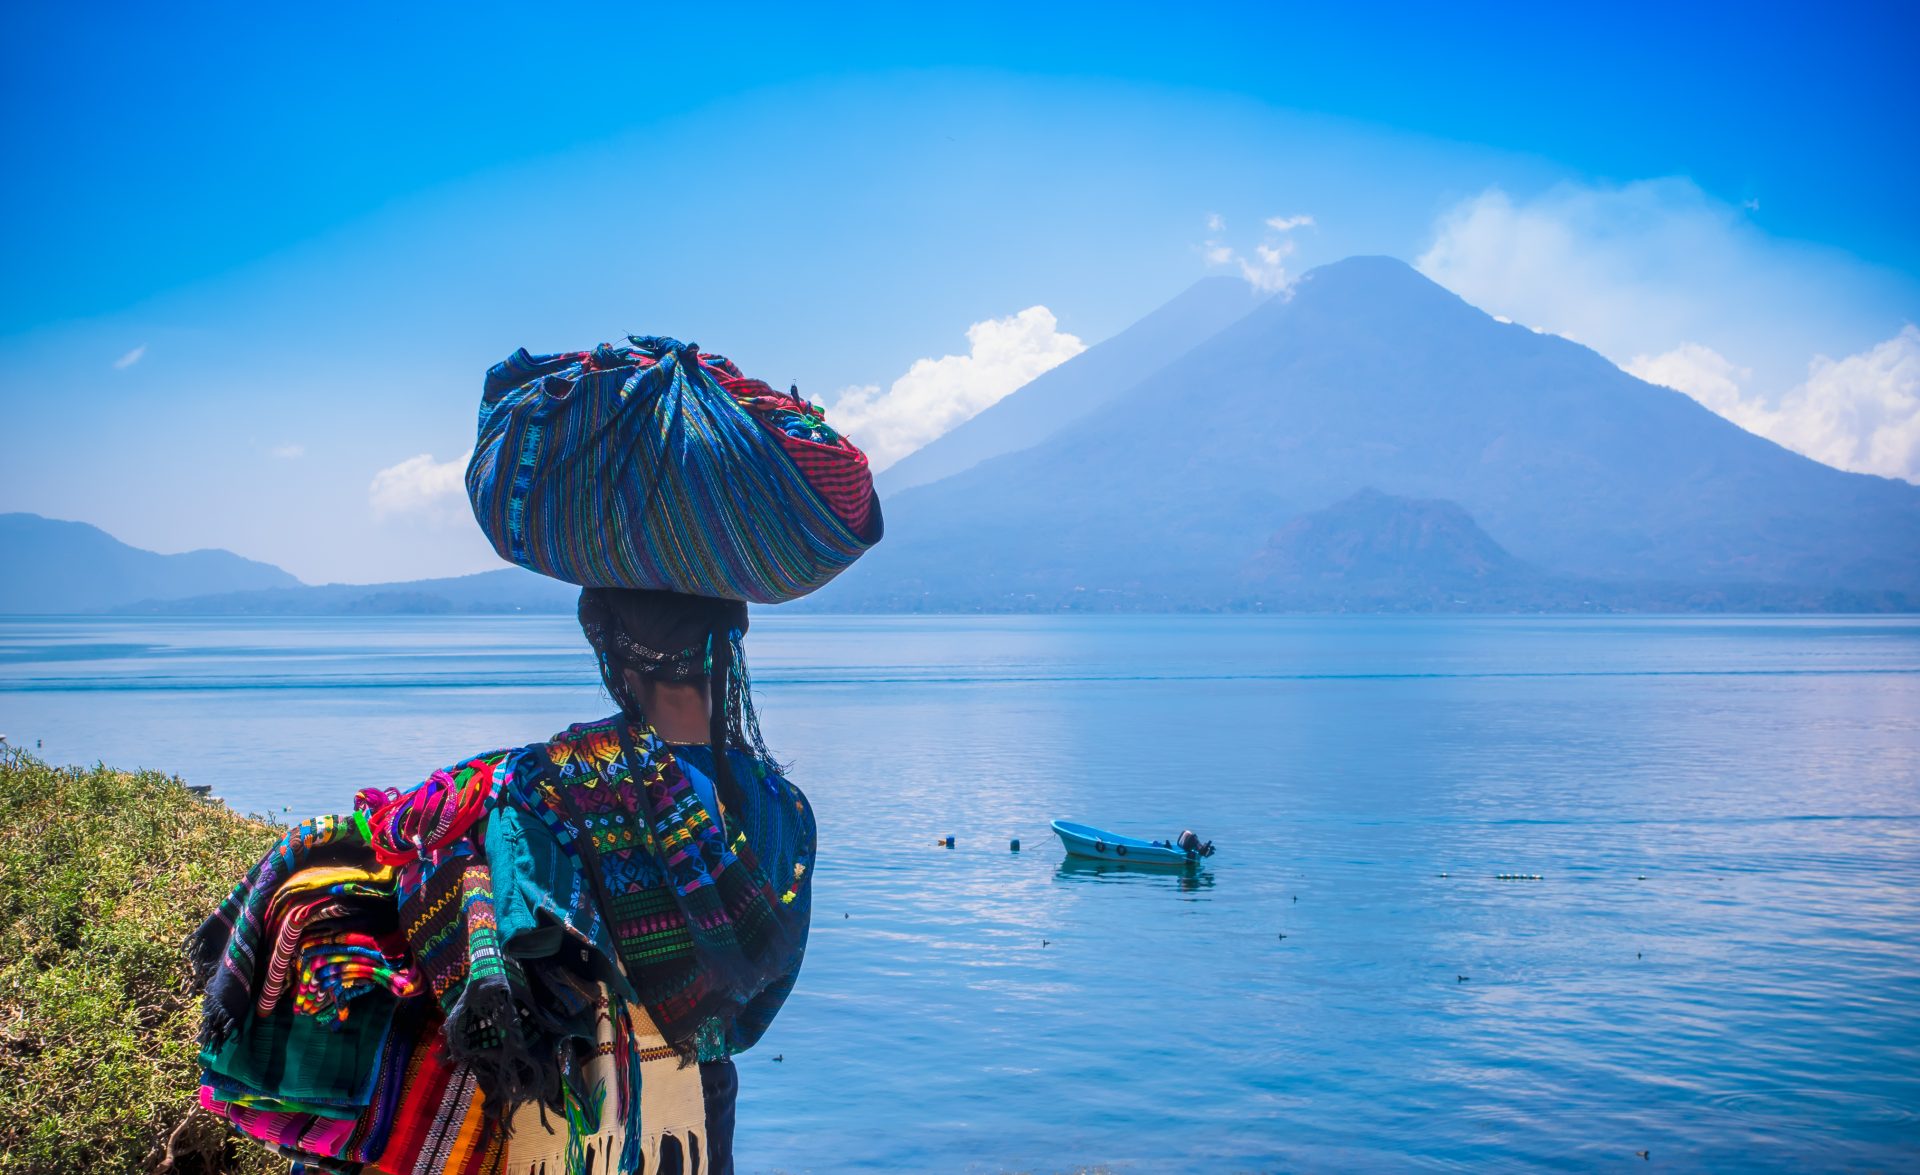 Outdoor view of unidentifed indigenous woman, wearing typical clothes and walking in lakeshore with small boats in Atitlan Lake and volcano in background